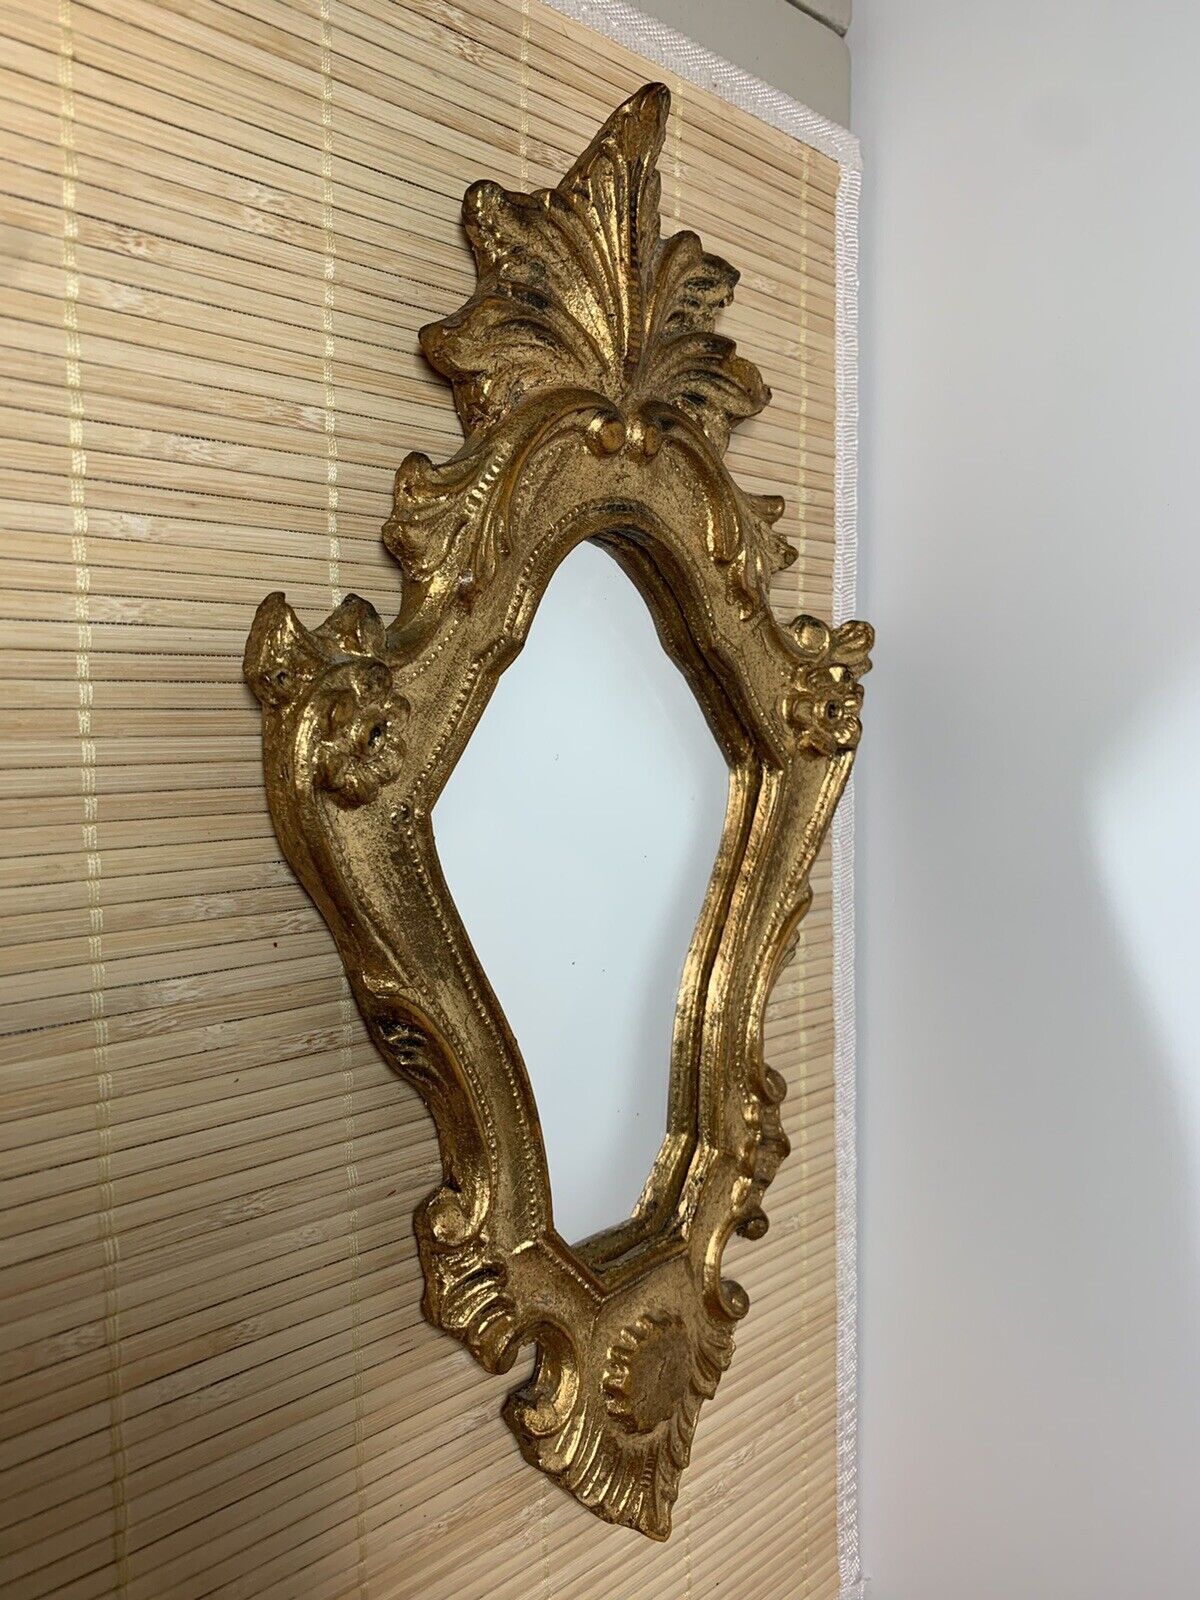 Vintage Italian Gilt Gold Leaf Rococo Picture Frame Mirror Hand Made Italy 13”